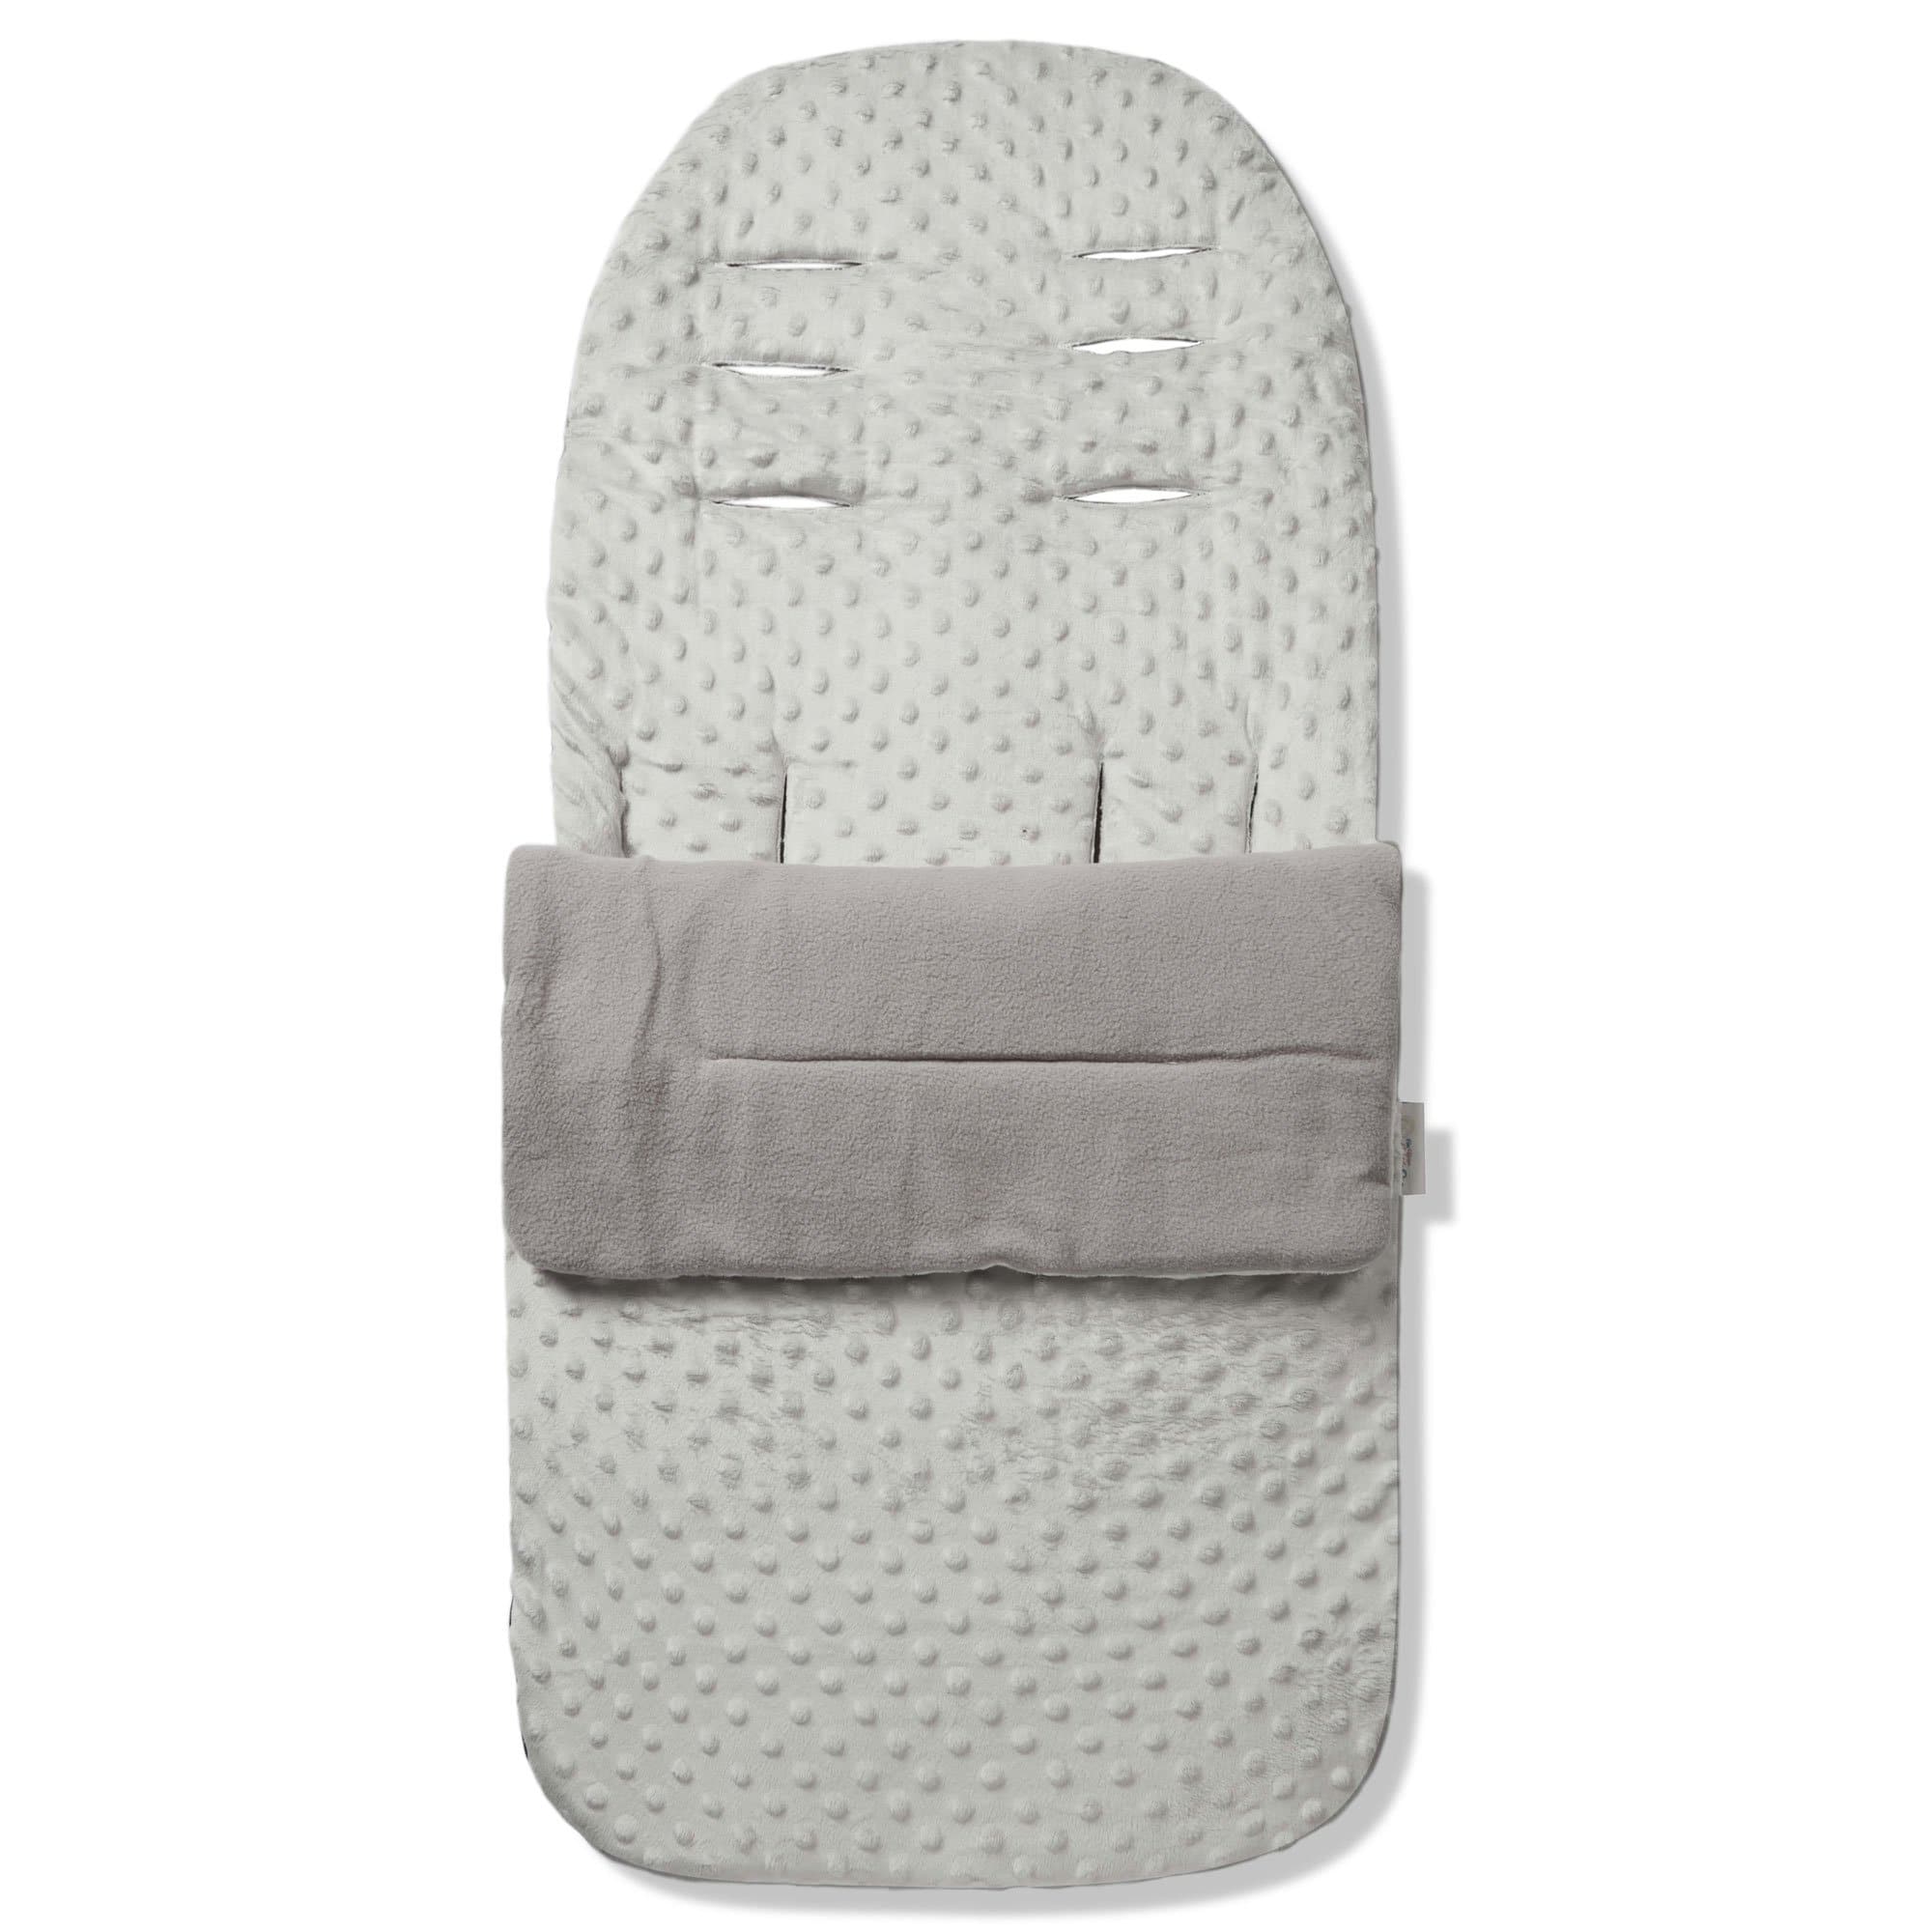 Dimple Footmuff / Cosy Toes Compatible with Kiddicare - Grey / Fits All Models | For Your Little One